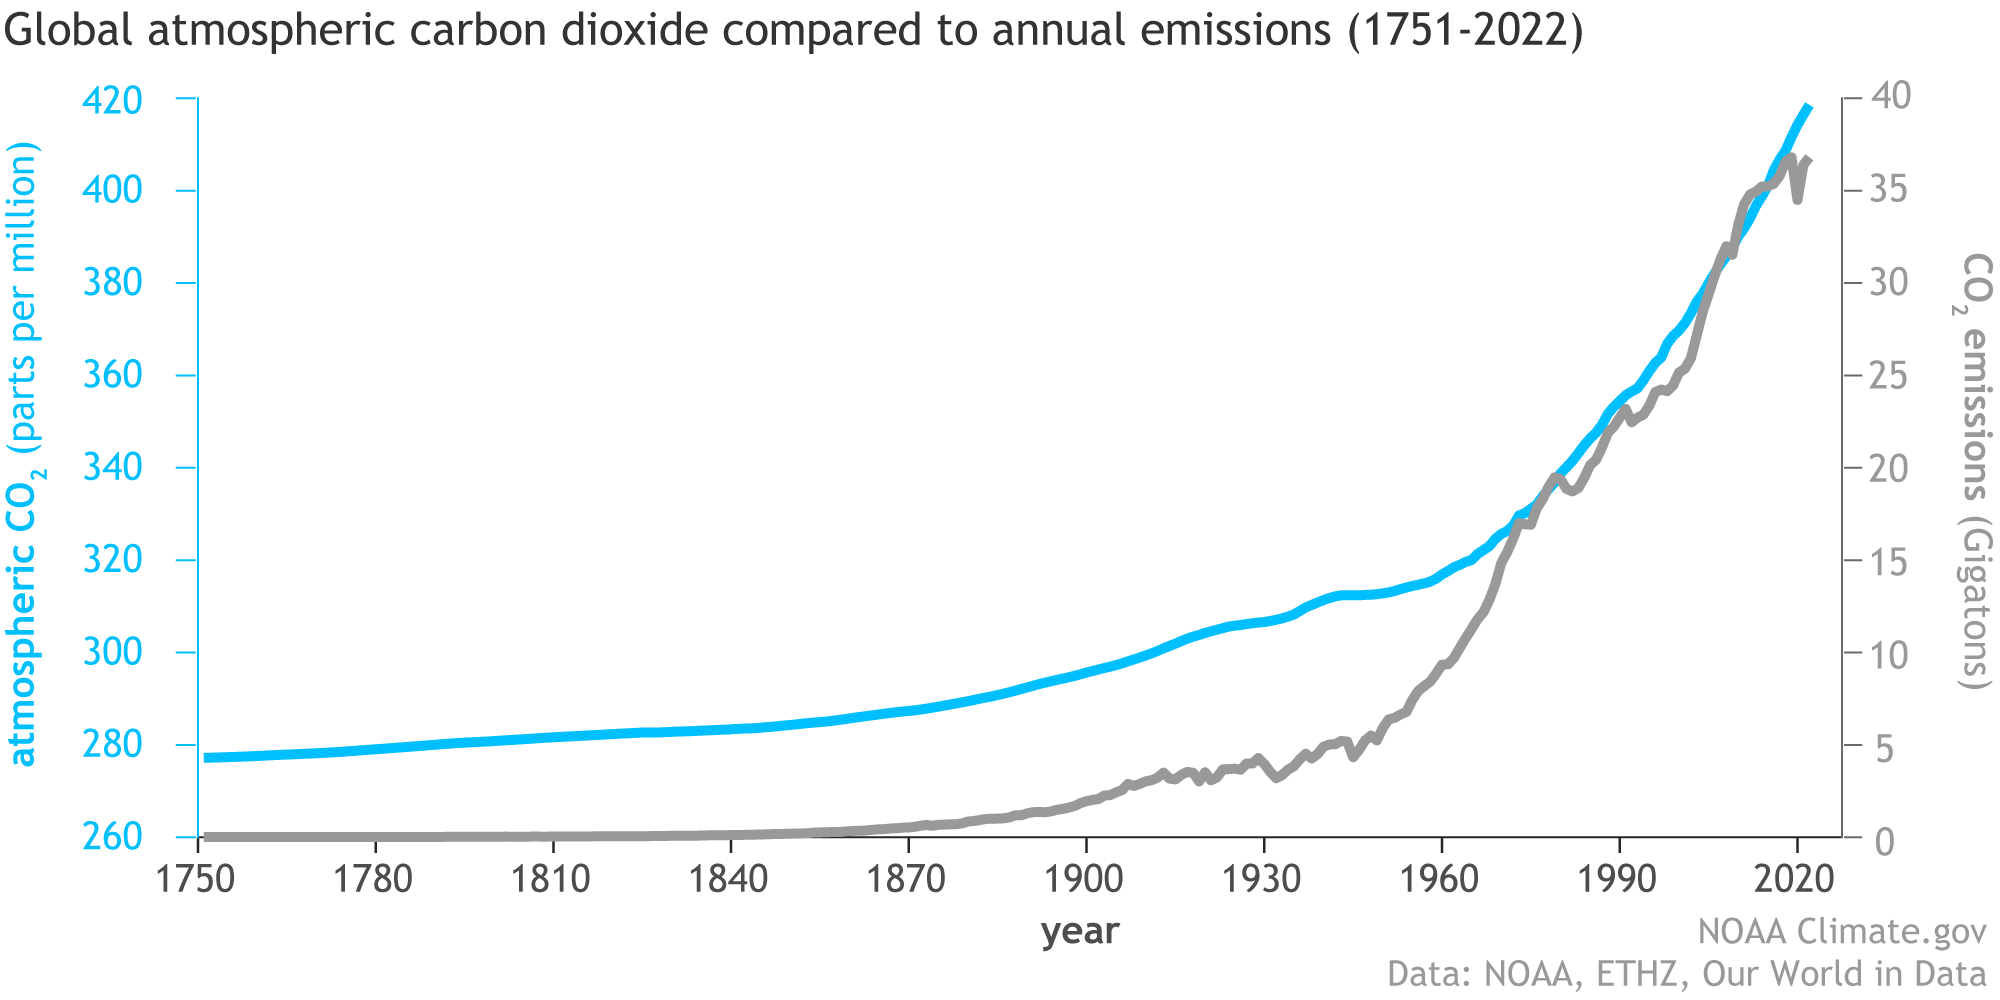 Chart showing global atmospheric carbon dioxide compared to annual emissions 1751-2022